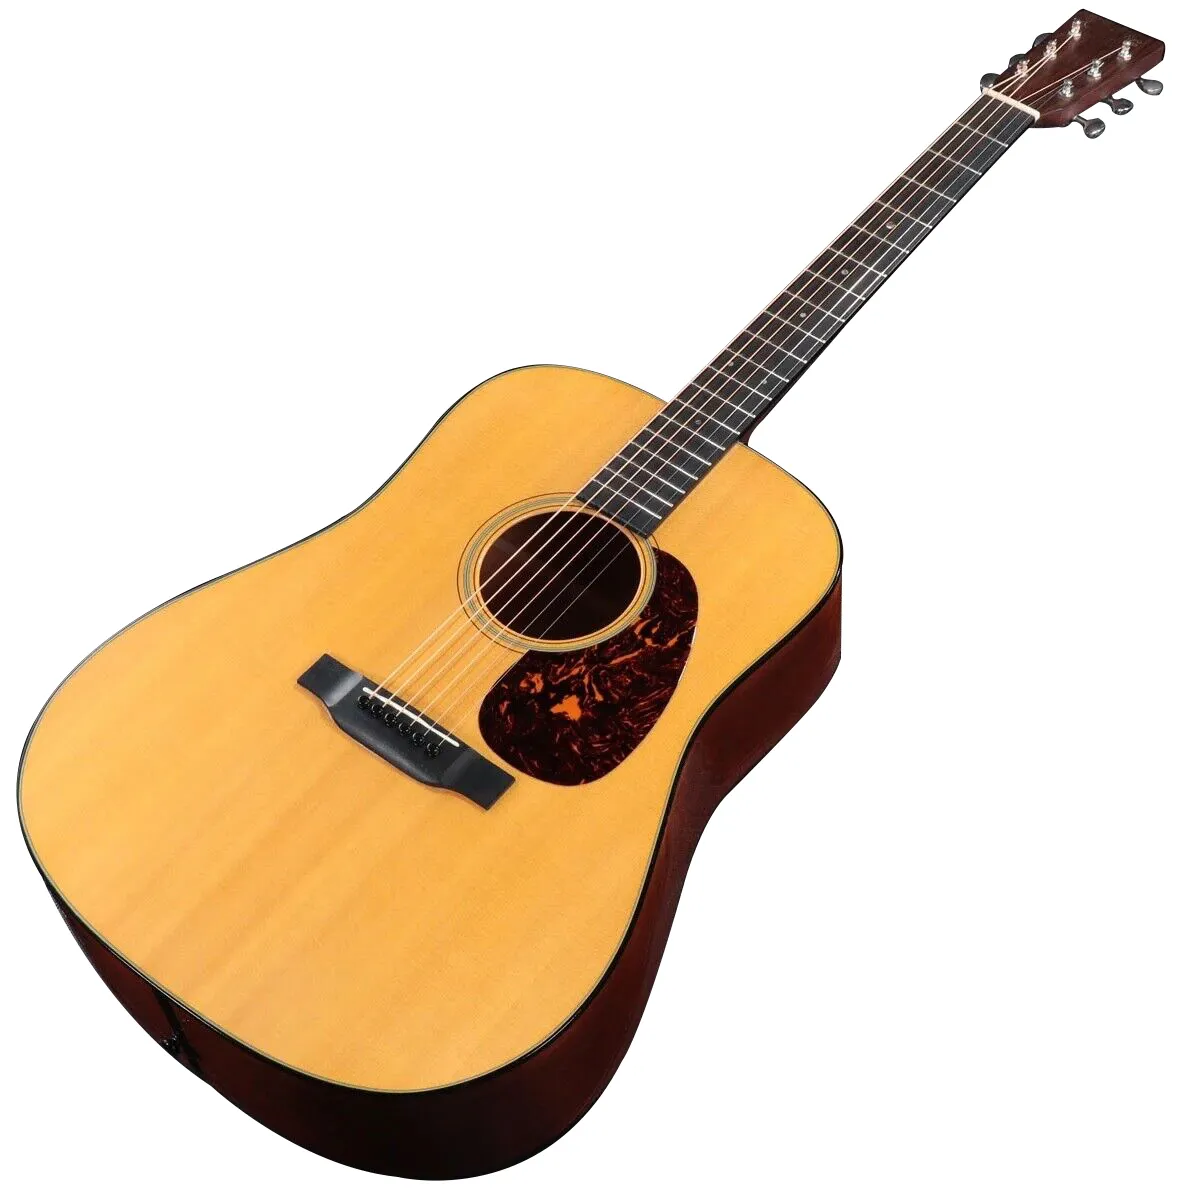 D18 Acoustic guitar F/S as same of the pictures